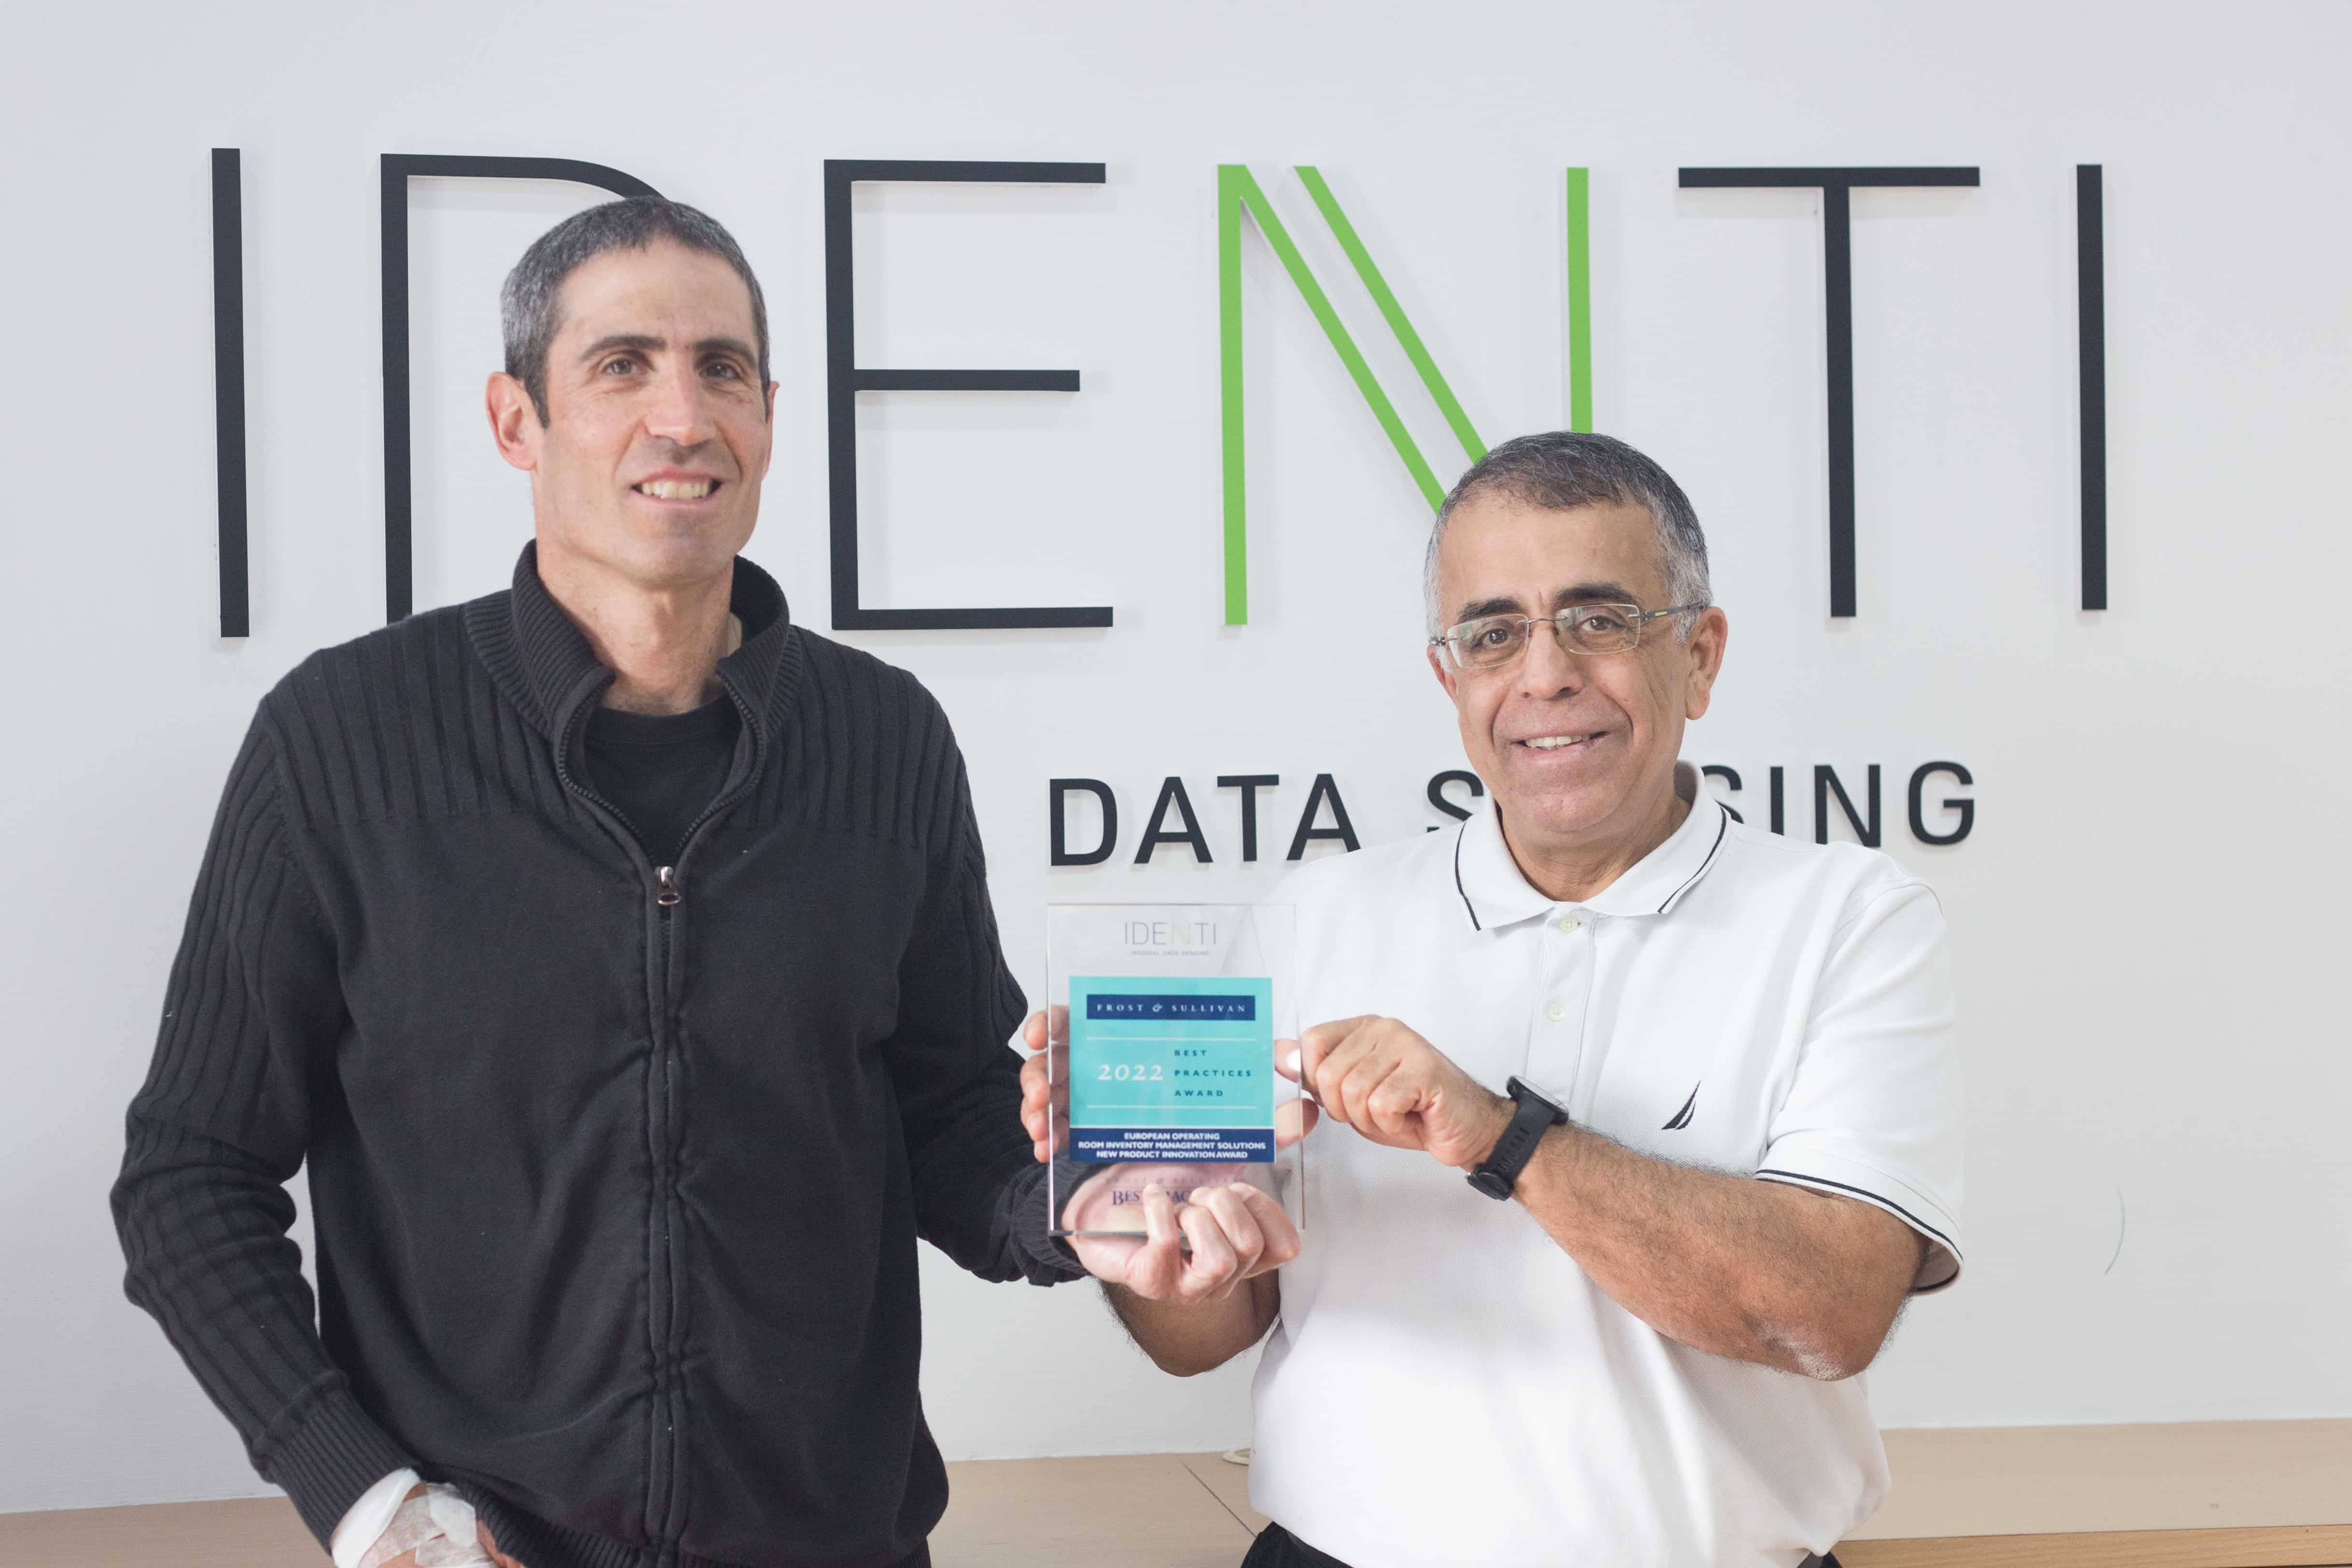 Identi Medical Wins the Frost & Sullivan Product Innovation Award for Increasing Inventory Visibility in Operating Rooms Using Image Recognition